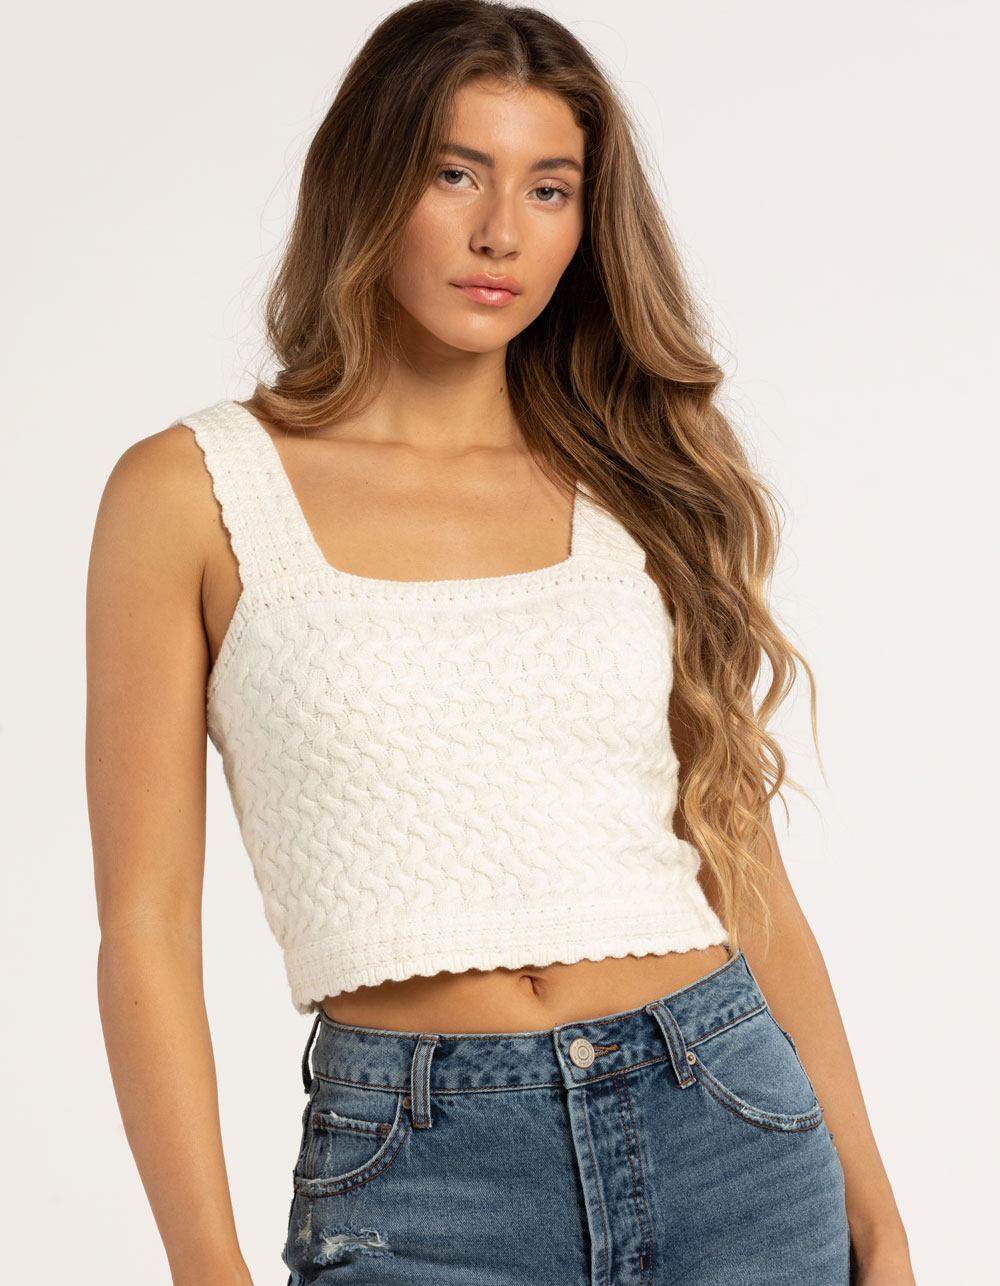 White Contrast Binding Strappy Crop Cami